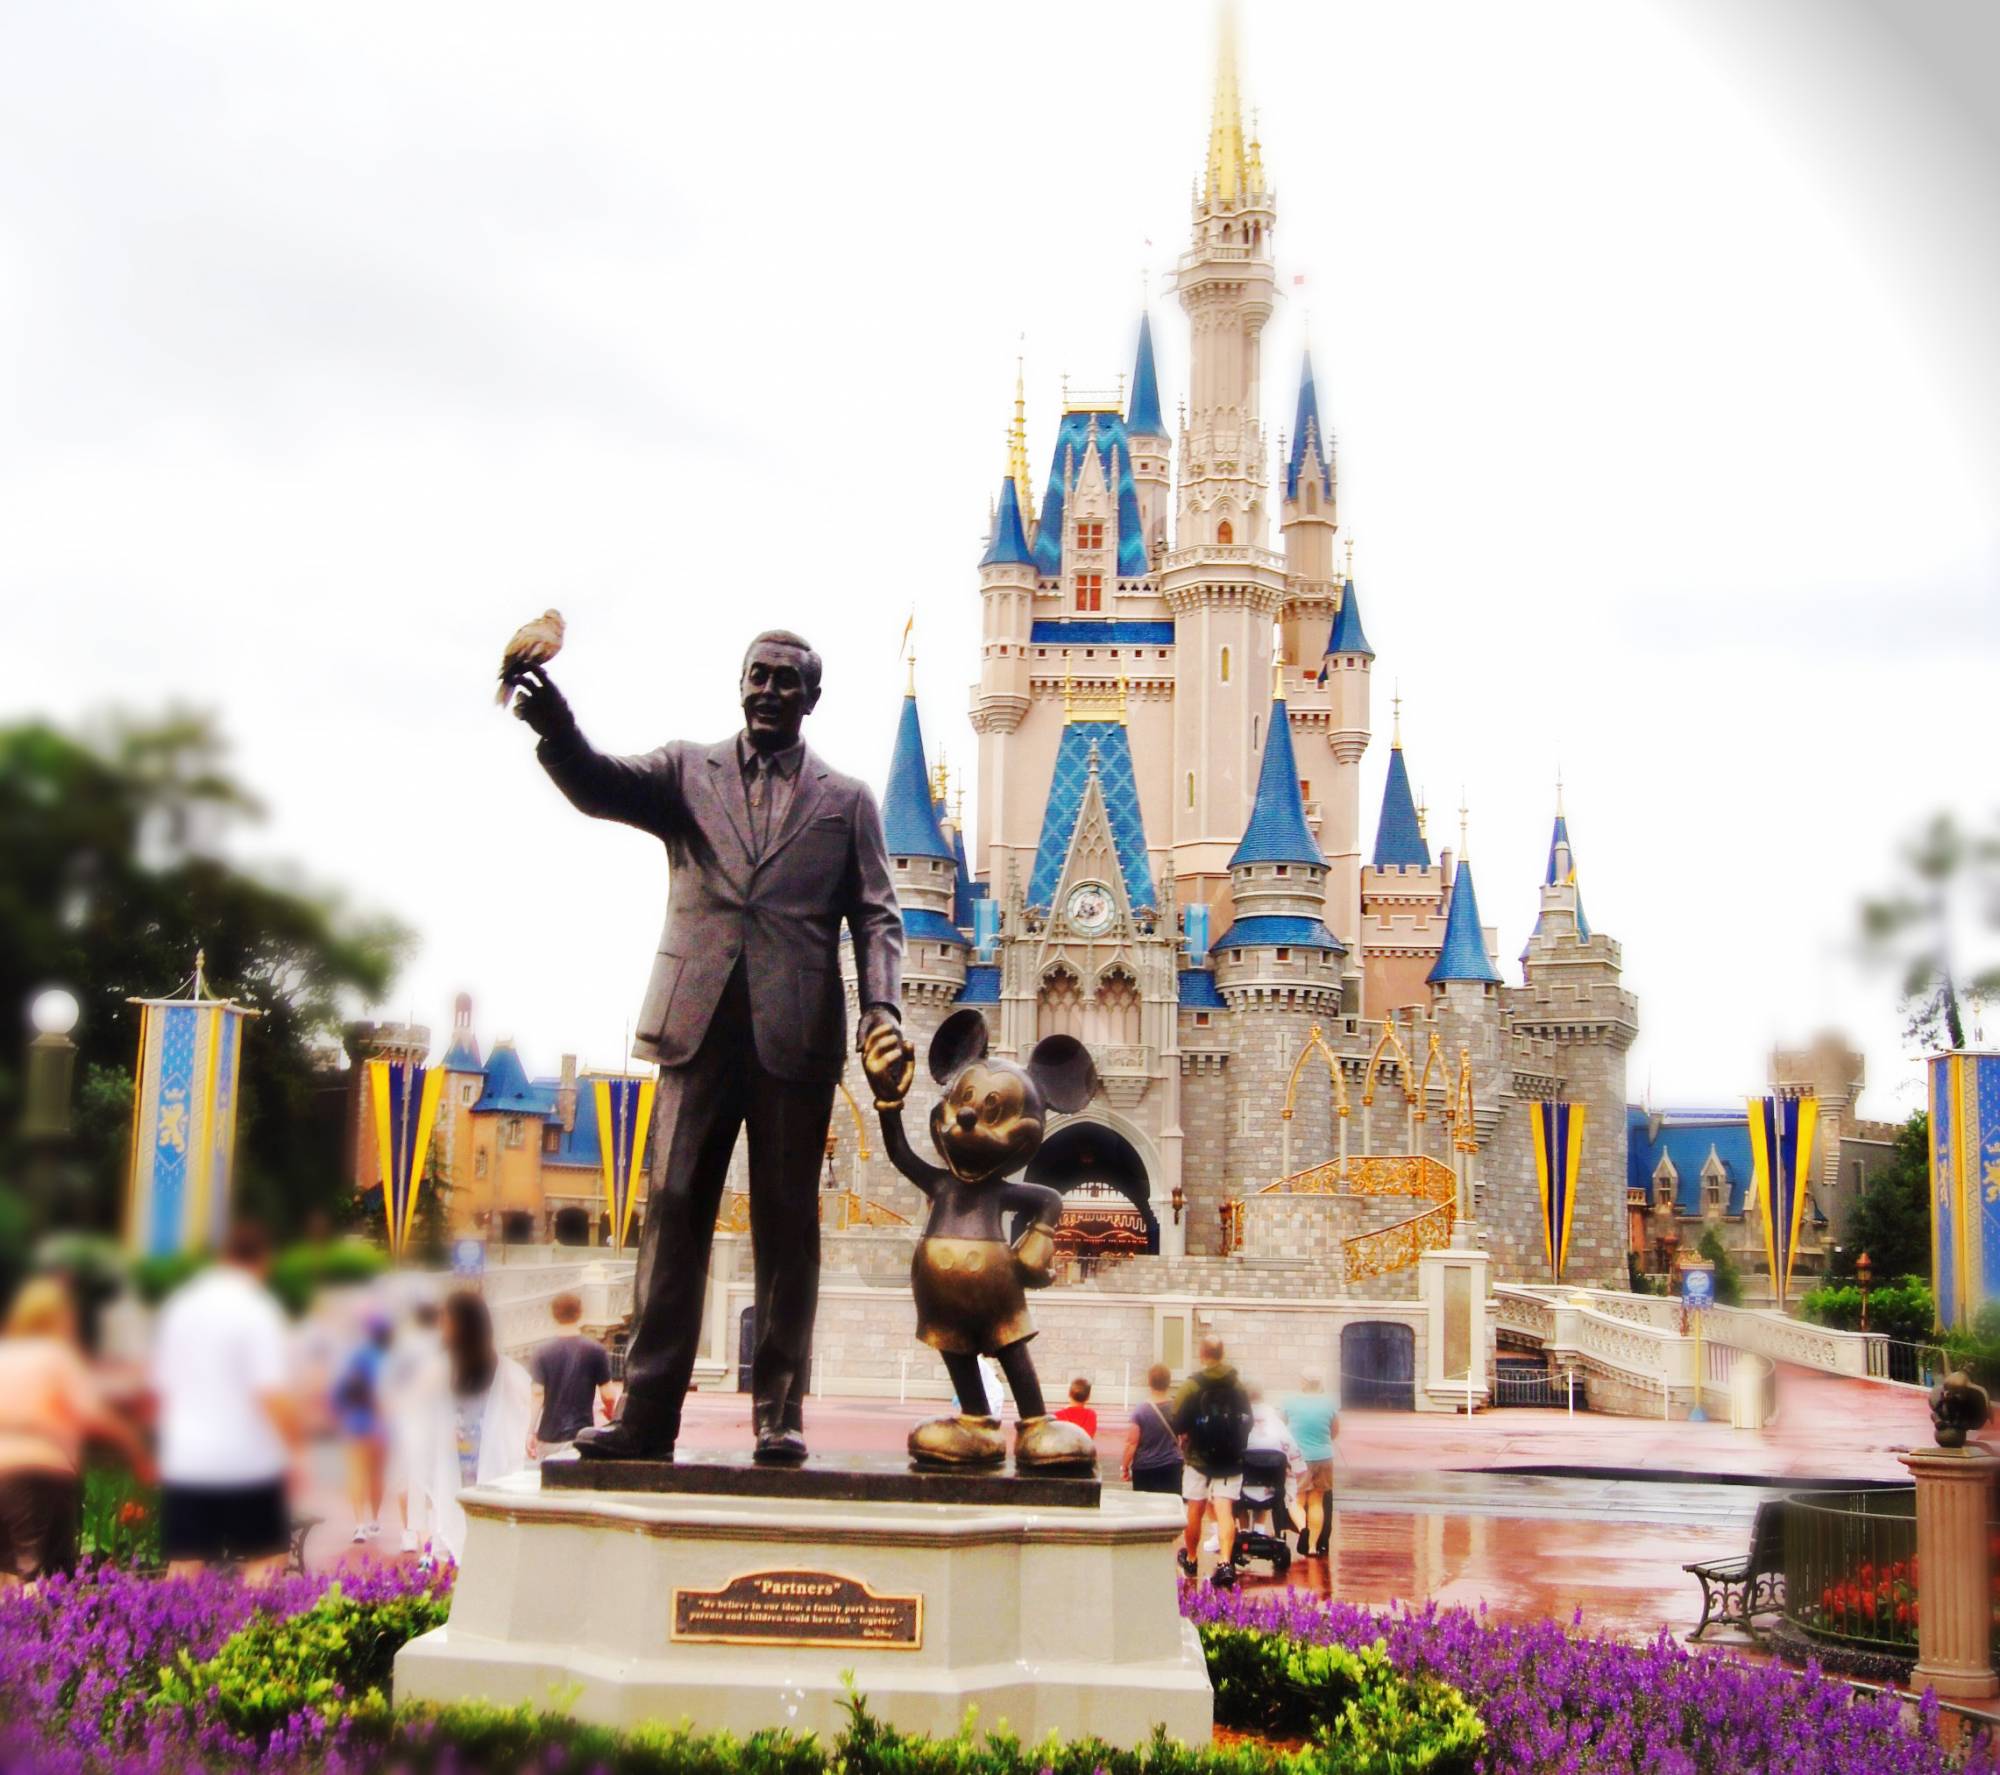 Walt &amp; Mickey Statue in front of the castle